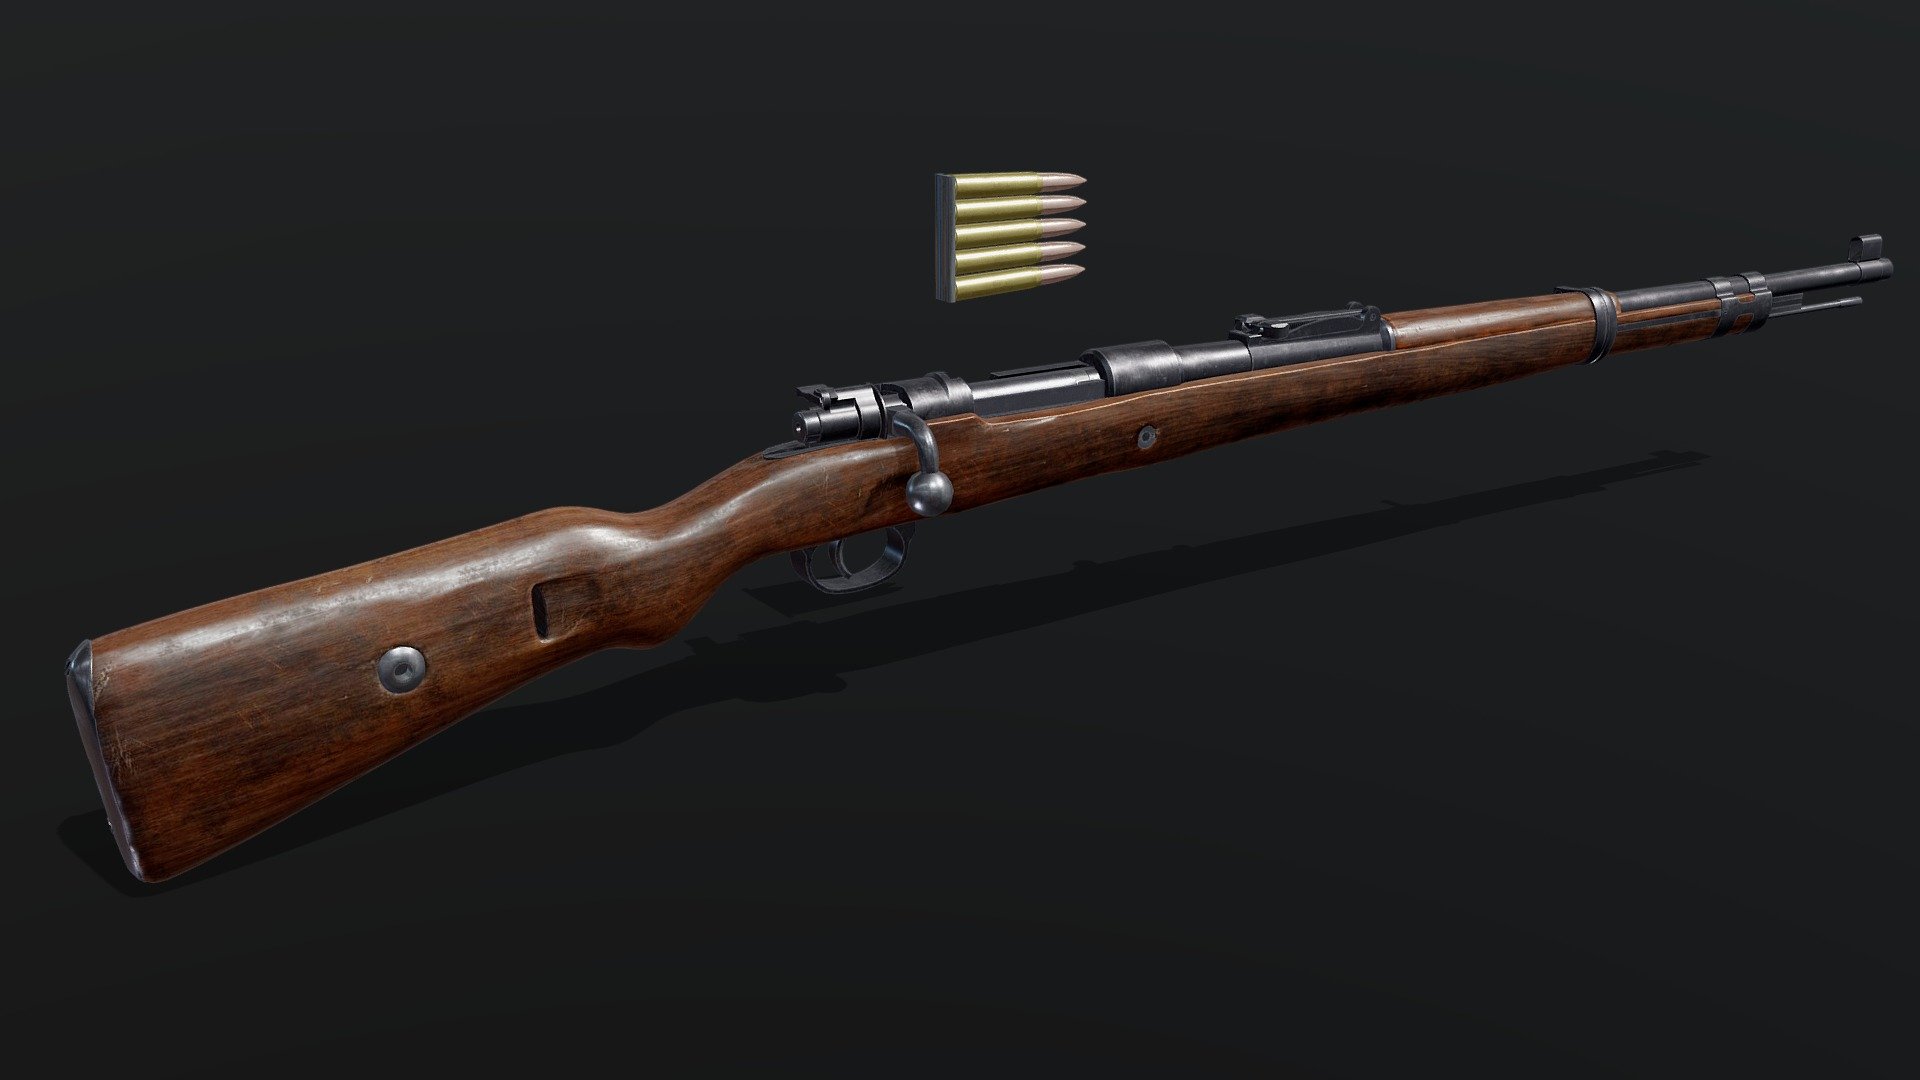 This is the bolt-action rifle Karabiner 98k.
It is a qualitative model suitable for film and games.


Included



a simple firing animation

4k PBR-Textures: Color, Metallic, Roghness, AO, Normal

additional Texture for Unity: Metallic Smoothness

additional Texture for Unity HD Renderpipeline: Mask Map

additional Textures for Unreal Engine: Occlusion Roughness Metallic
 - Karabiner 98k - Buy Royalty Free 3D model by macomix 3d model